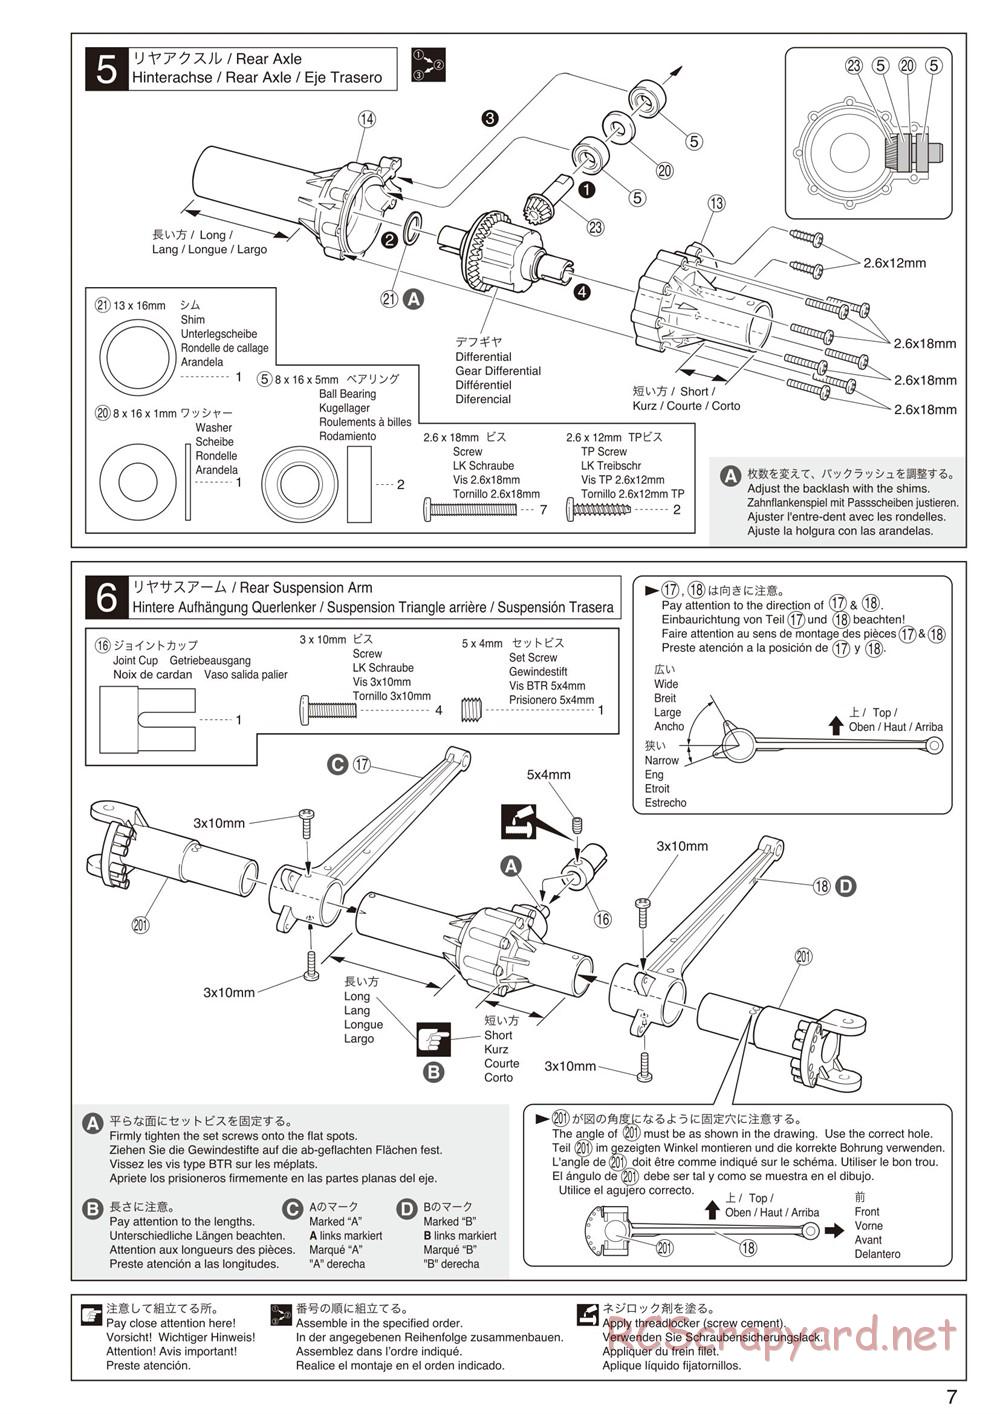 Kyosho - FO-XX VE - Manual - Page 7